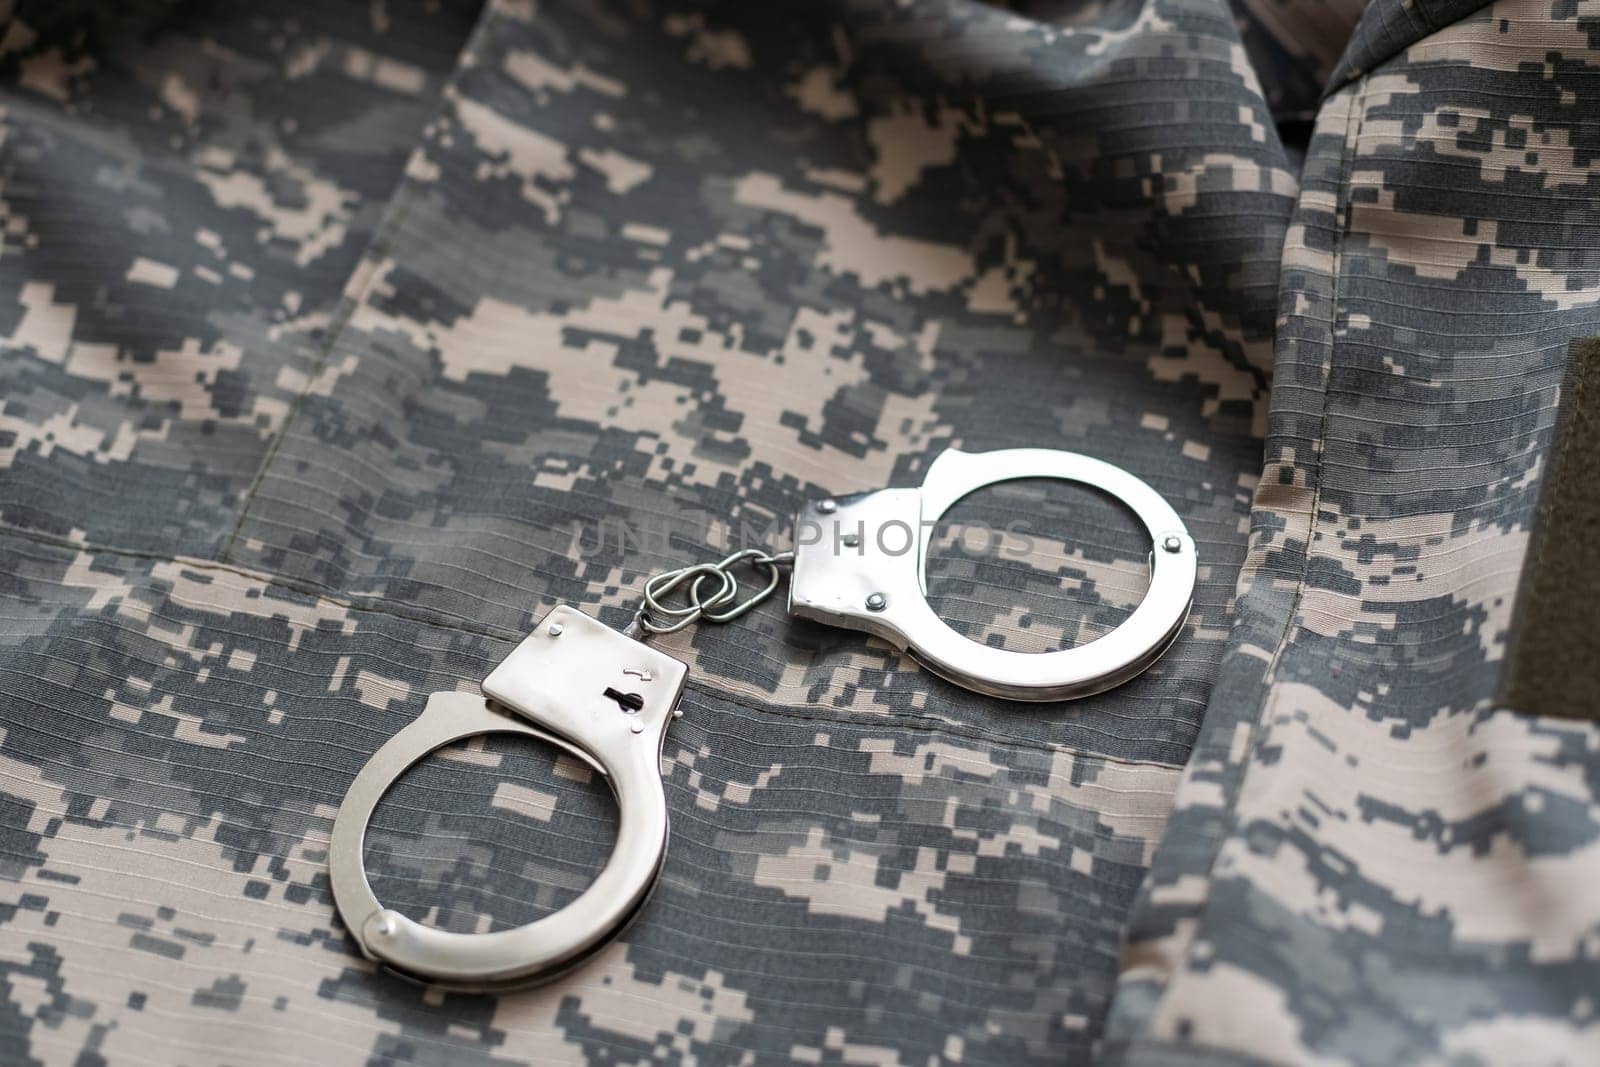 military camouflage uniform, handcuffed on background. by Andelov13